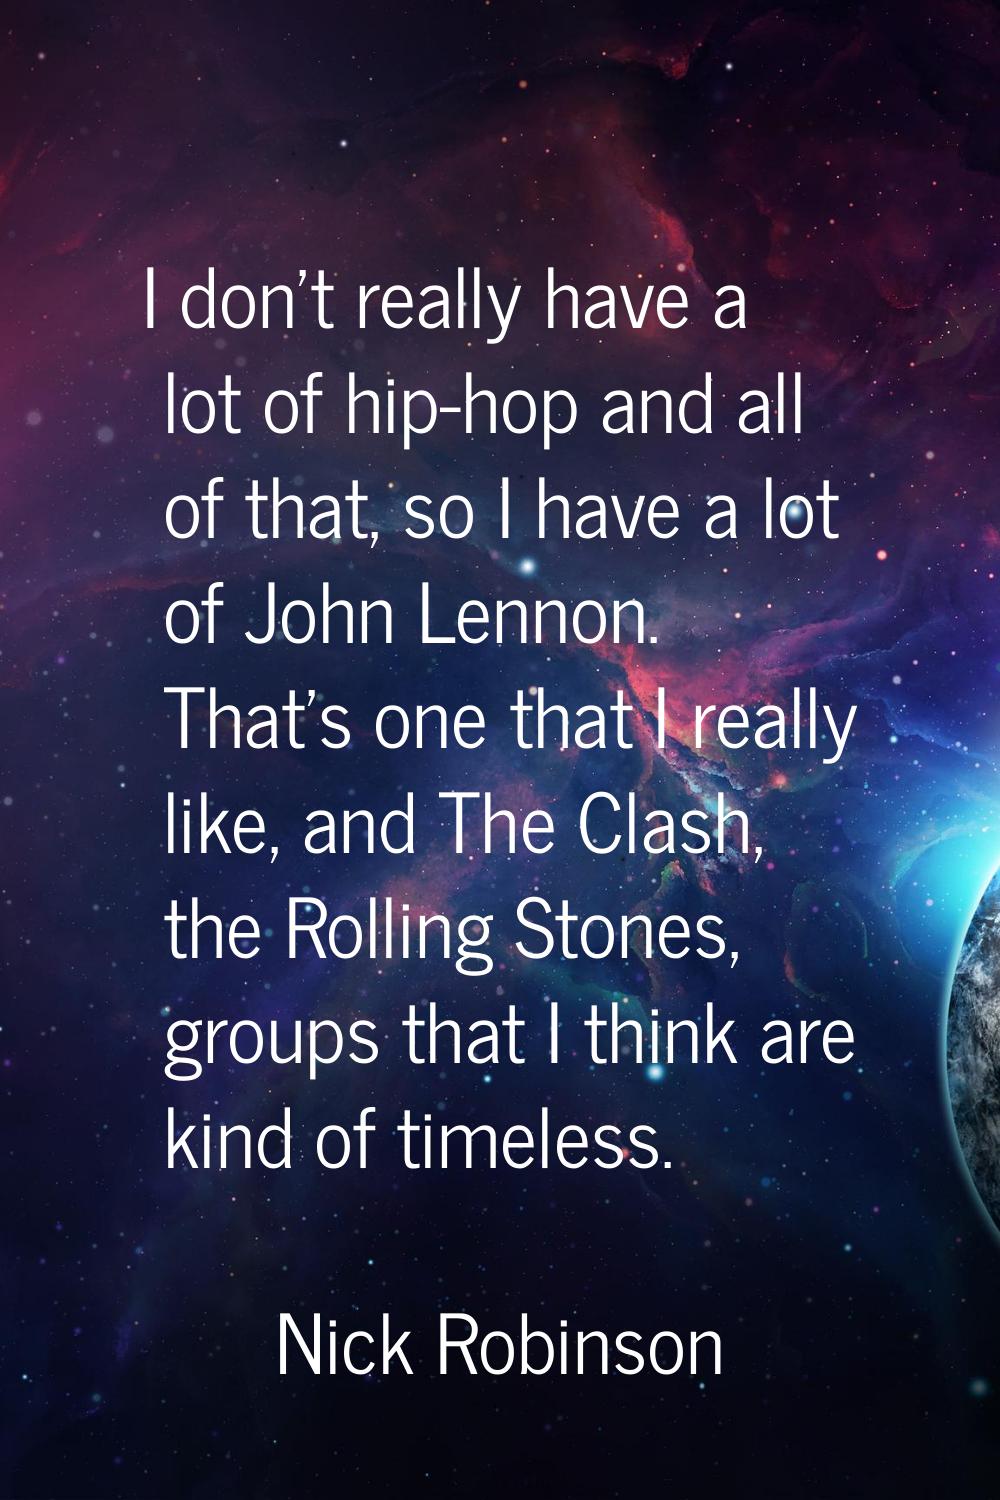 I don't really have a lot of hip-hop and all of that, so I have a lot of John Lennon. That's one th